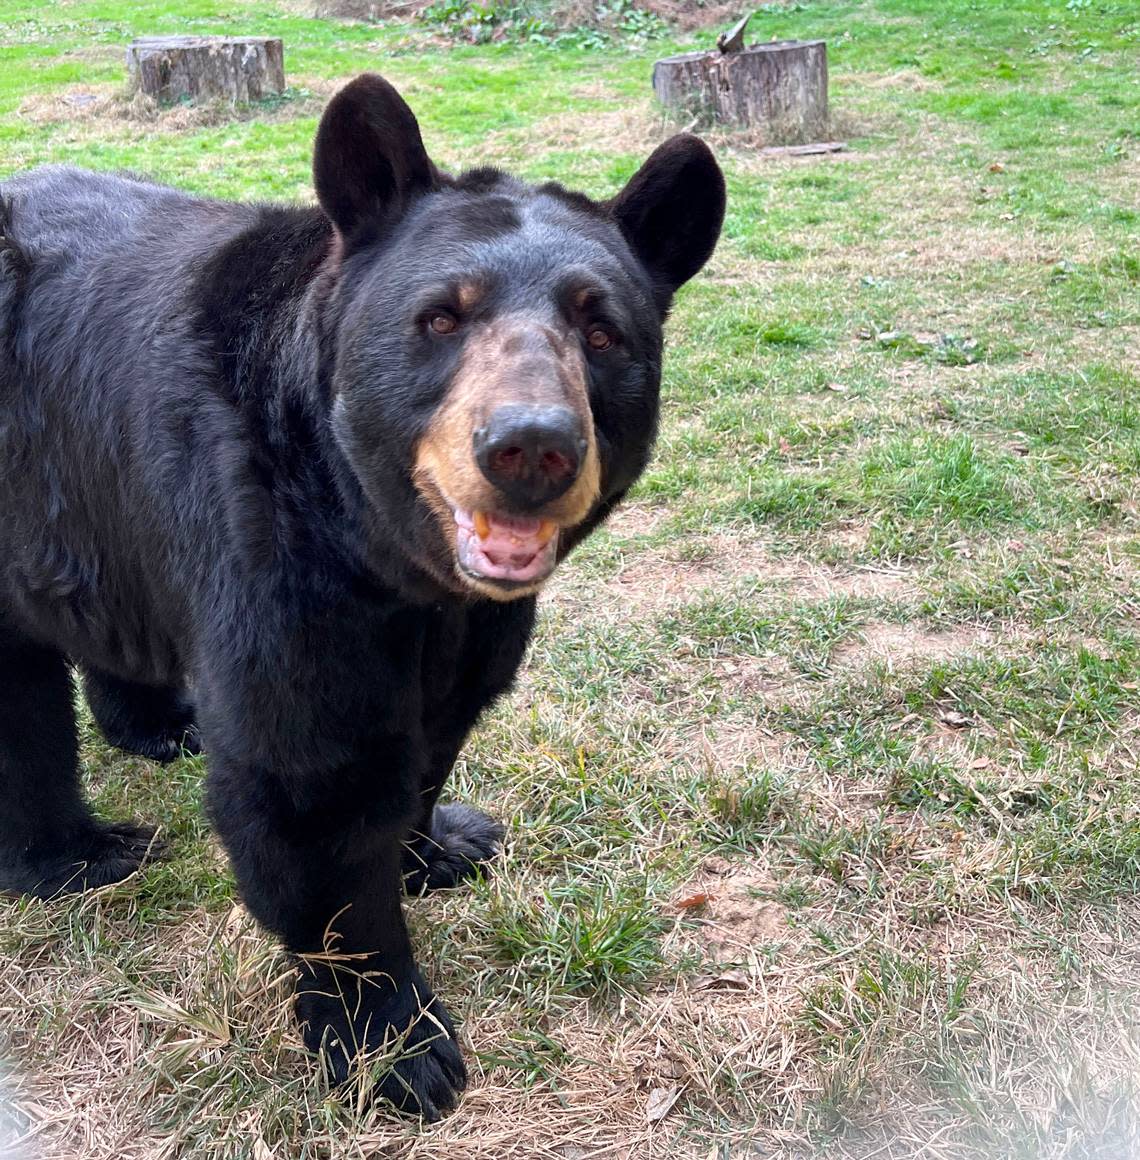 The Museum of Life and Science says Gus, an 18-year-old American black bear who has been part of the Durham museum since 2006, has died.